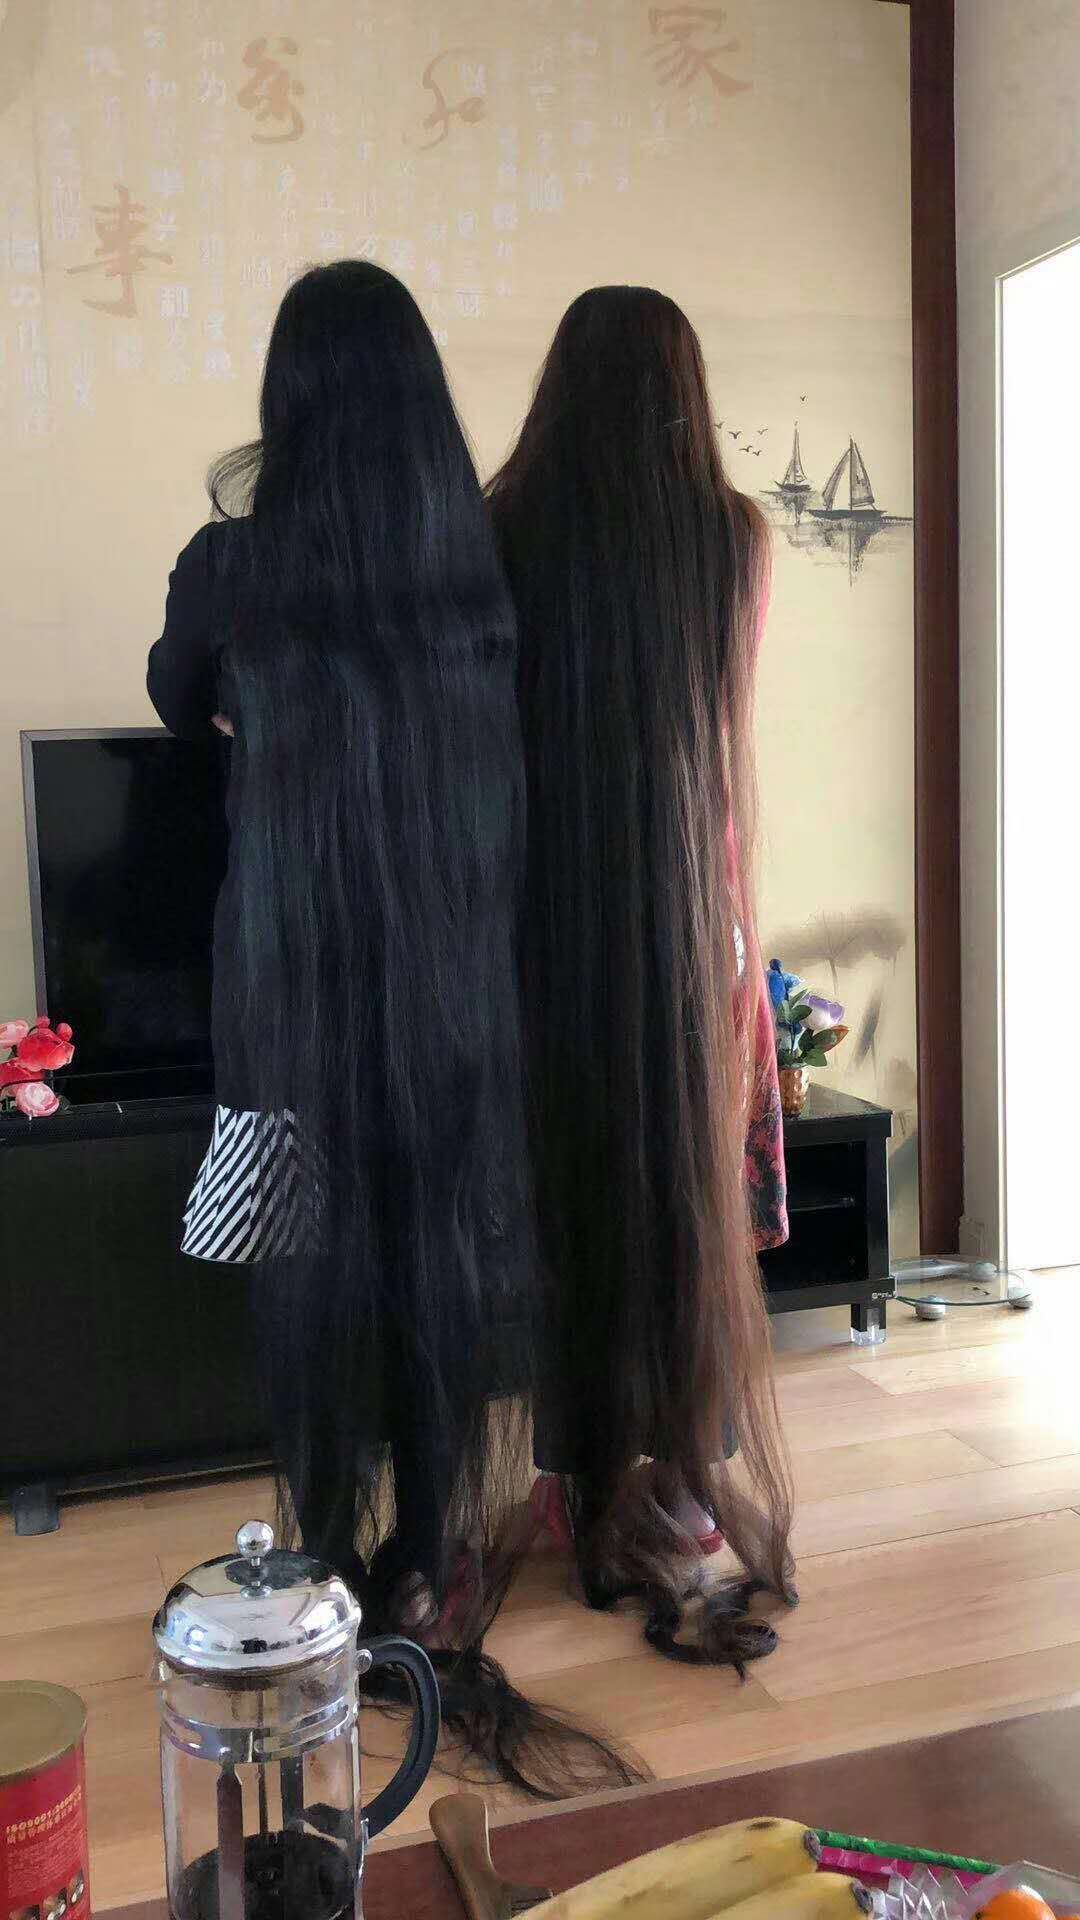 2 super long hair ladies stand together